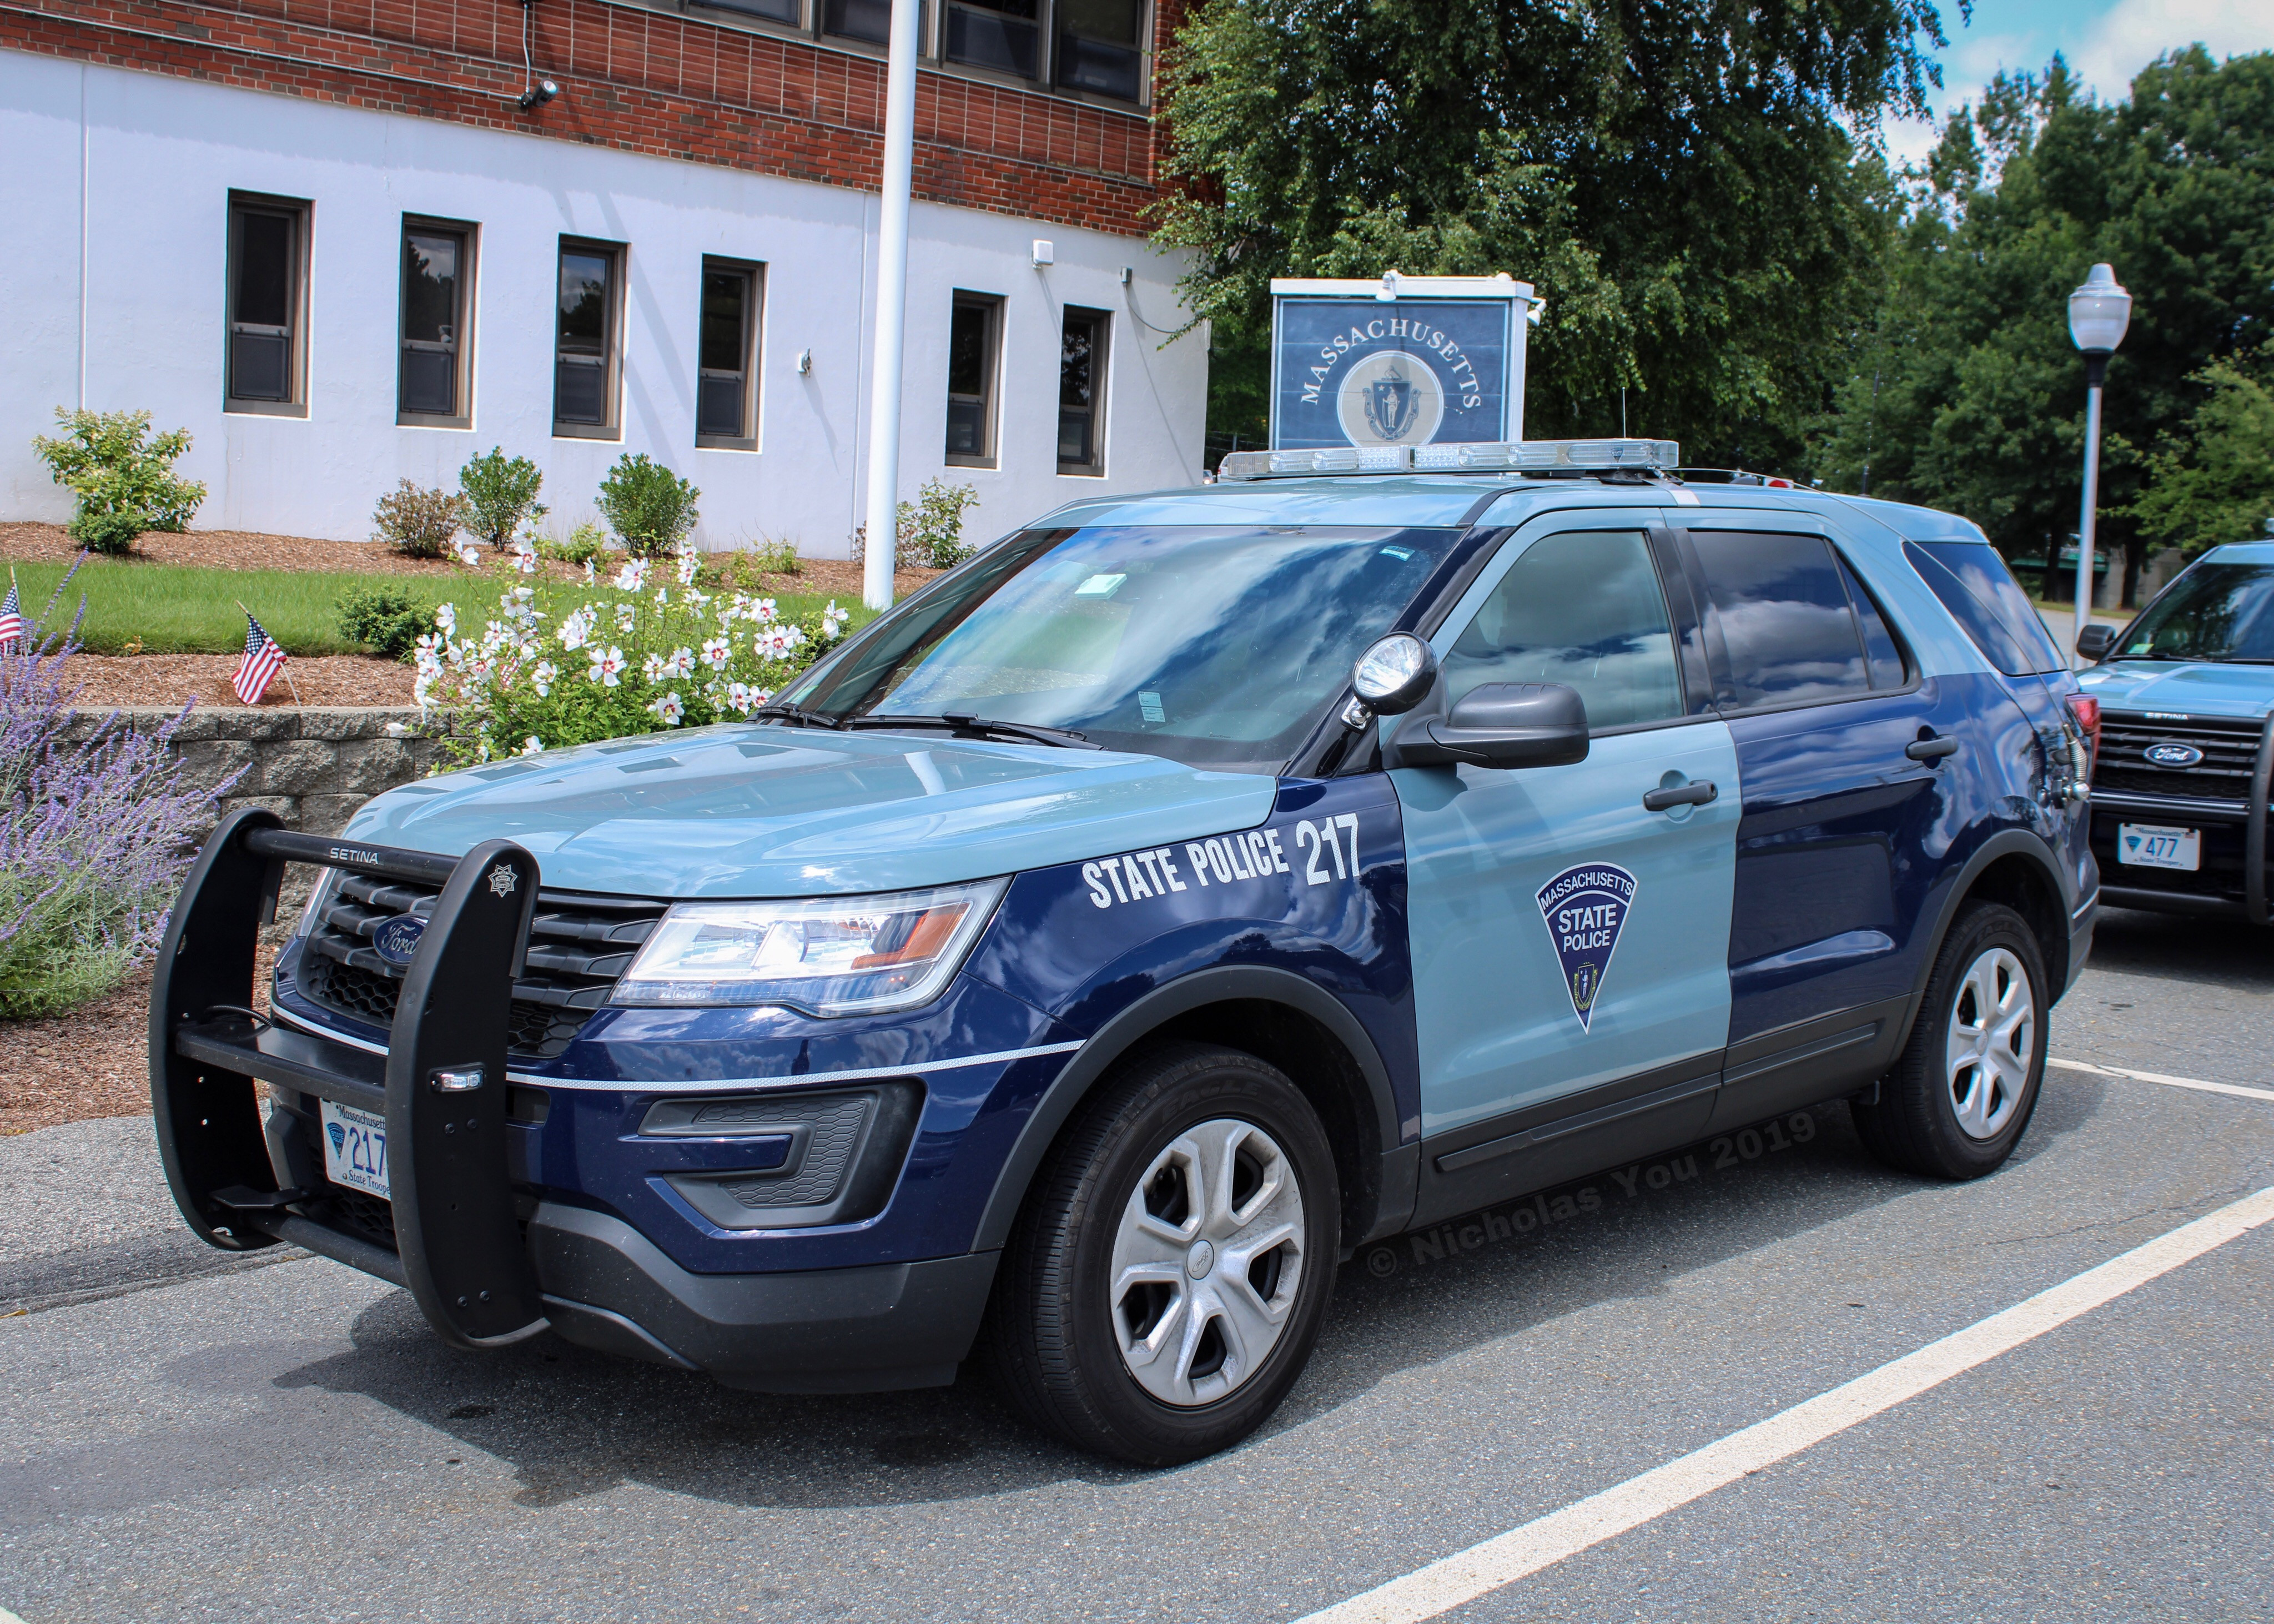 A photo  of Massachusetts State Police
            Cruiser 217, a 2018 Ford Police Interceptor Utility             taken by Nicholas You